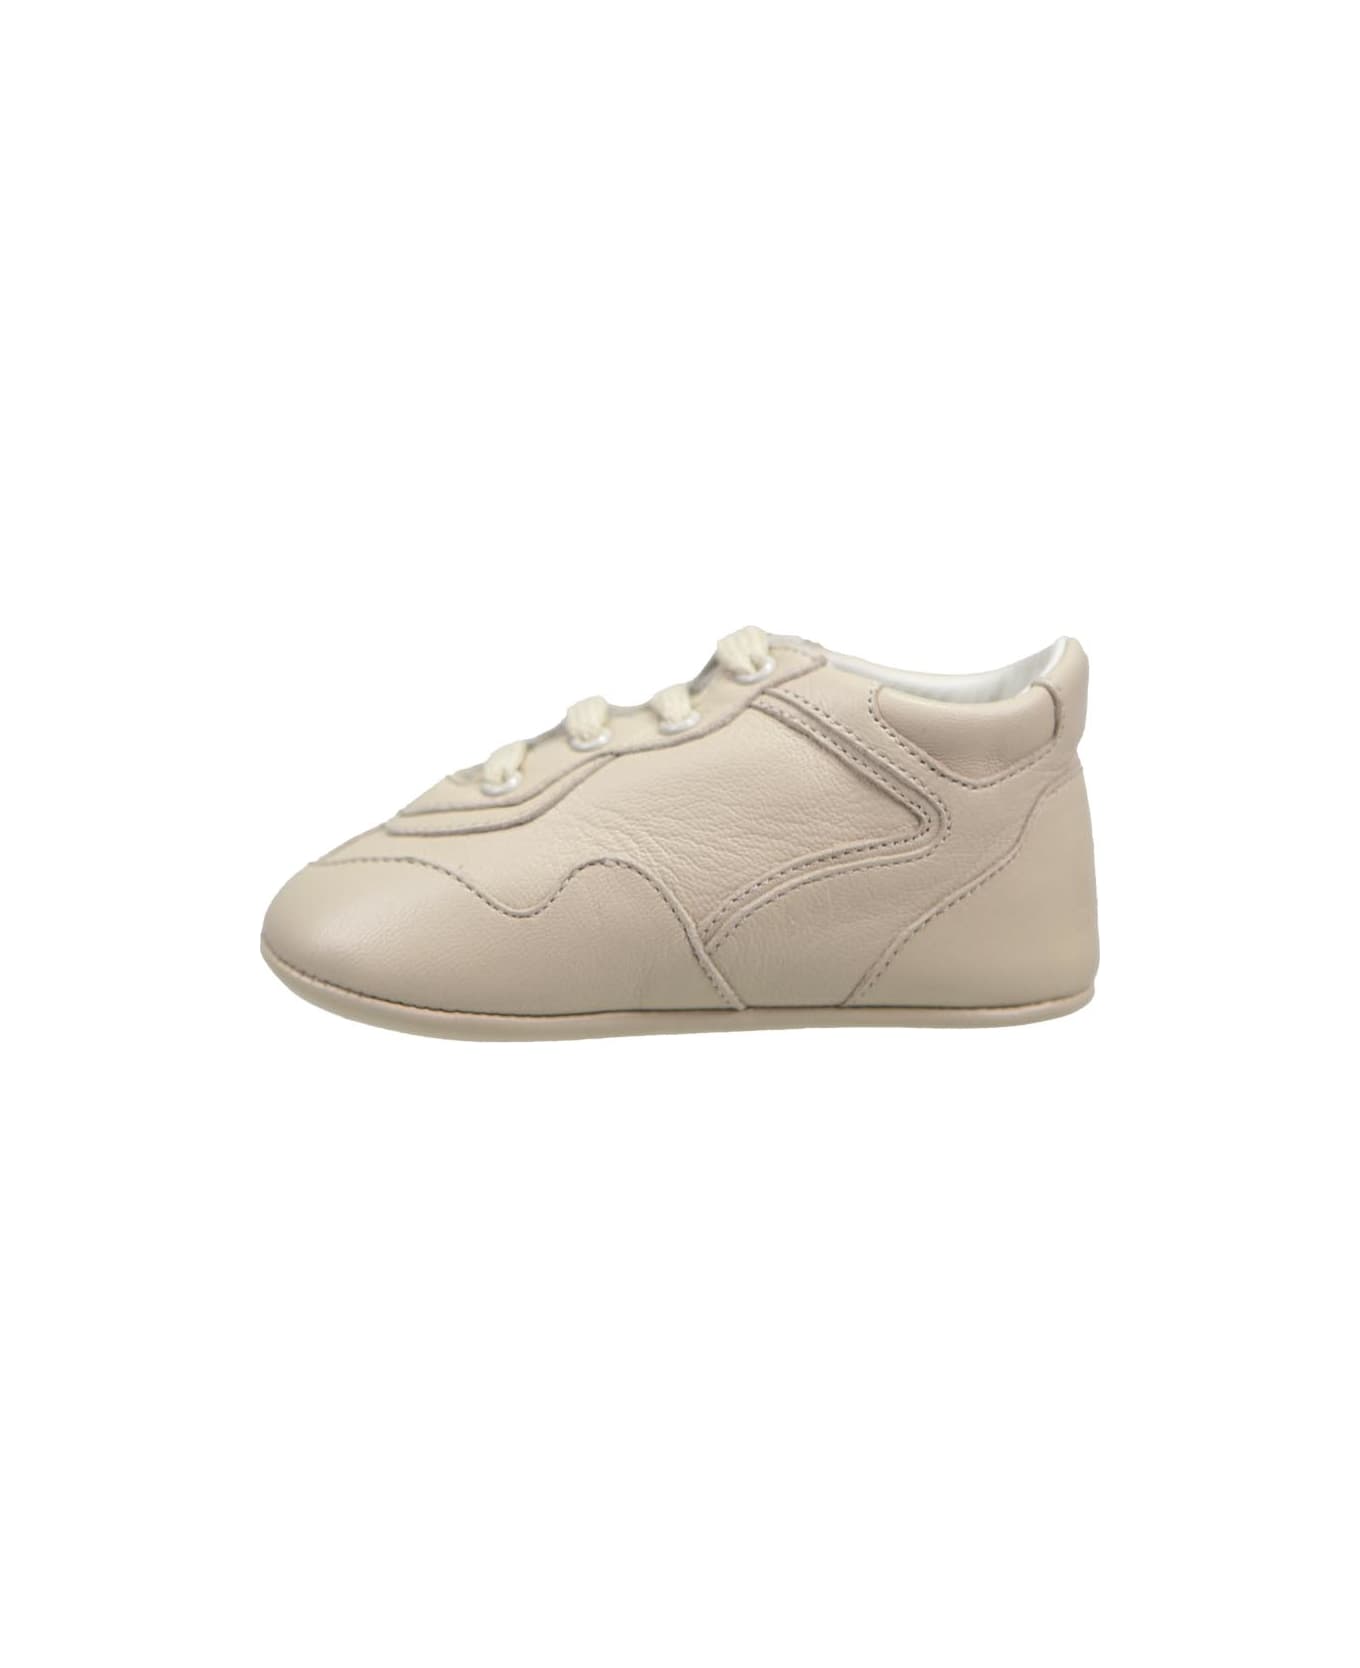 Gucci Leather Shoes - White シューズ